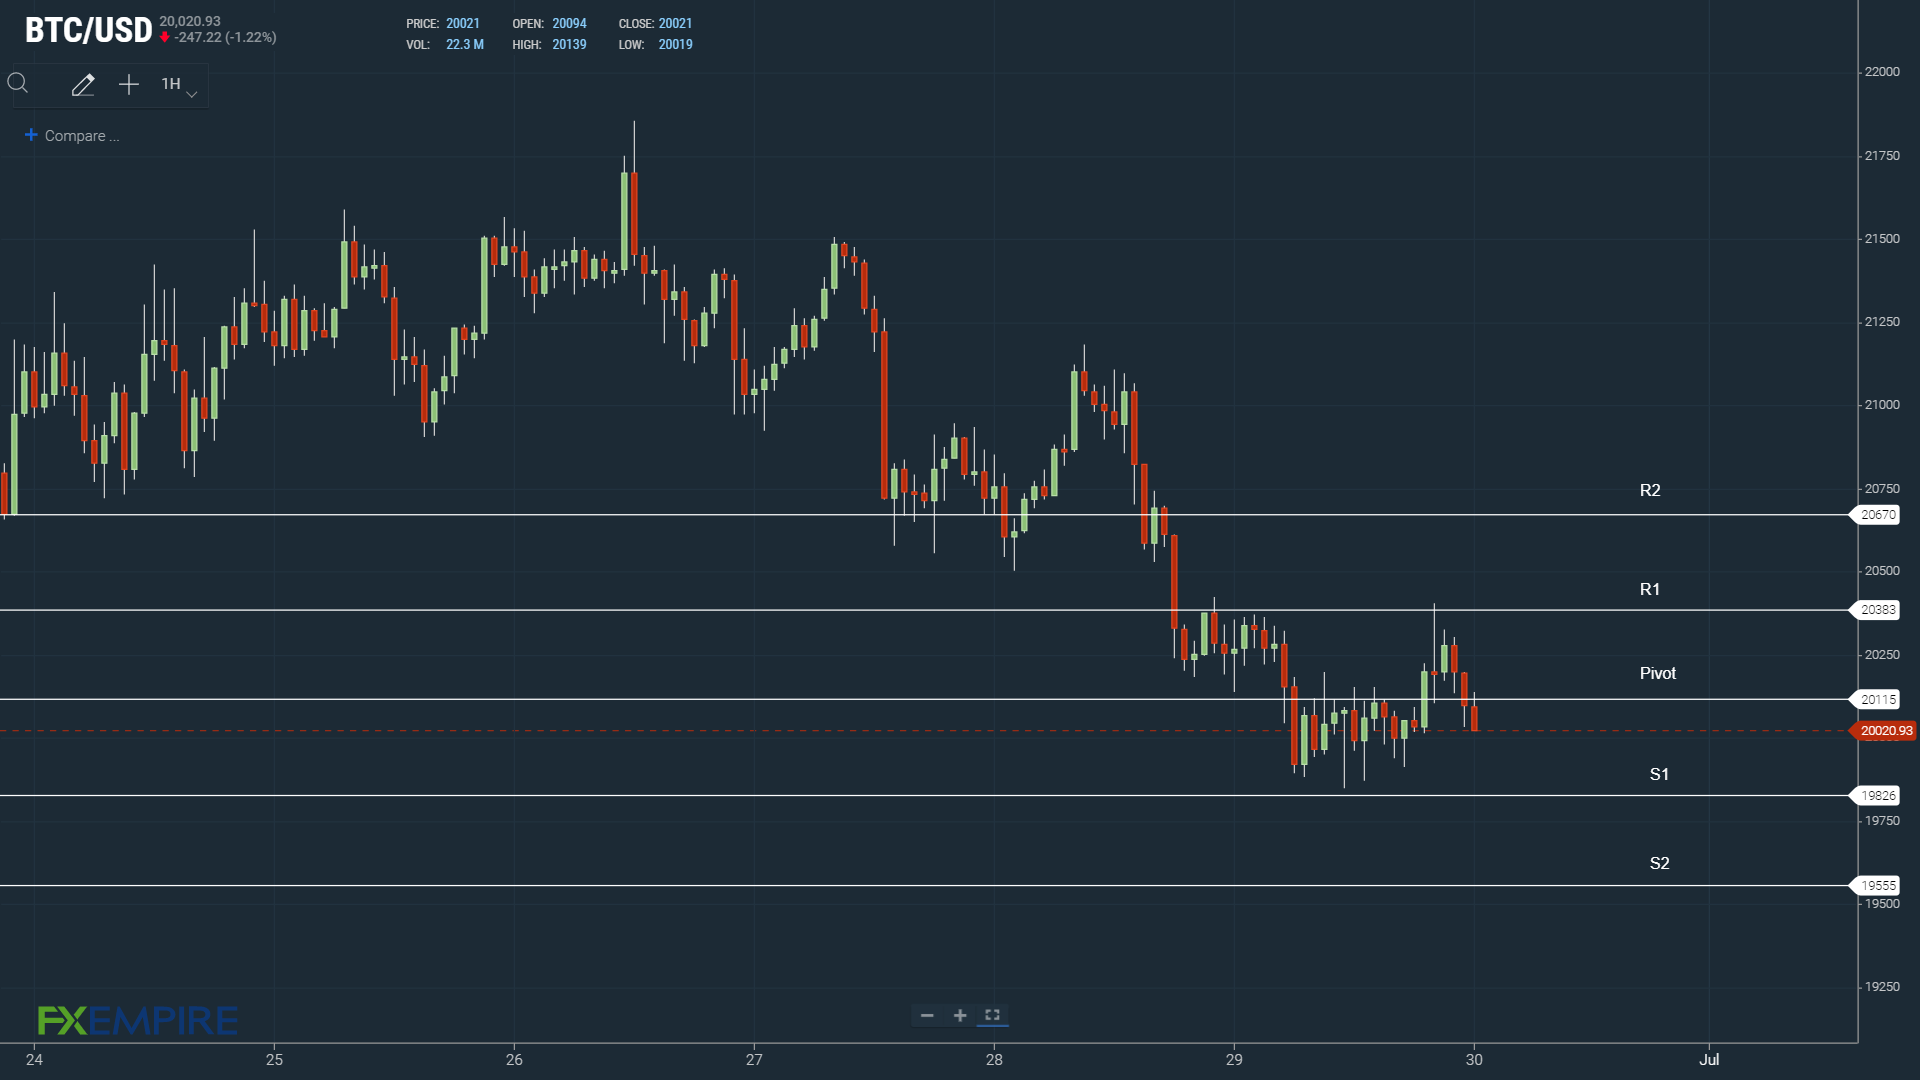 BTC support levels in play